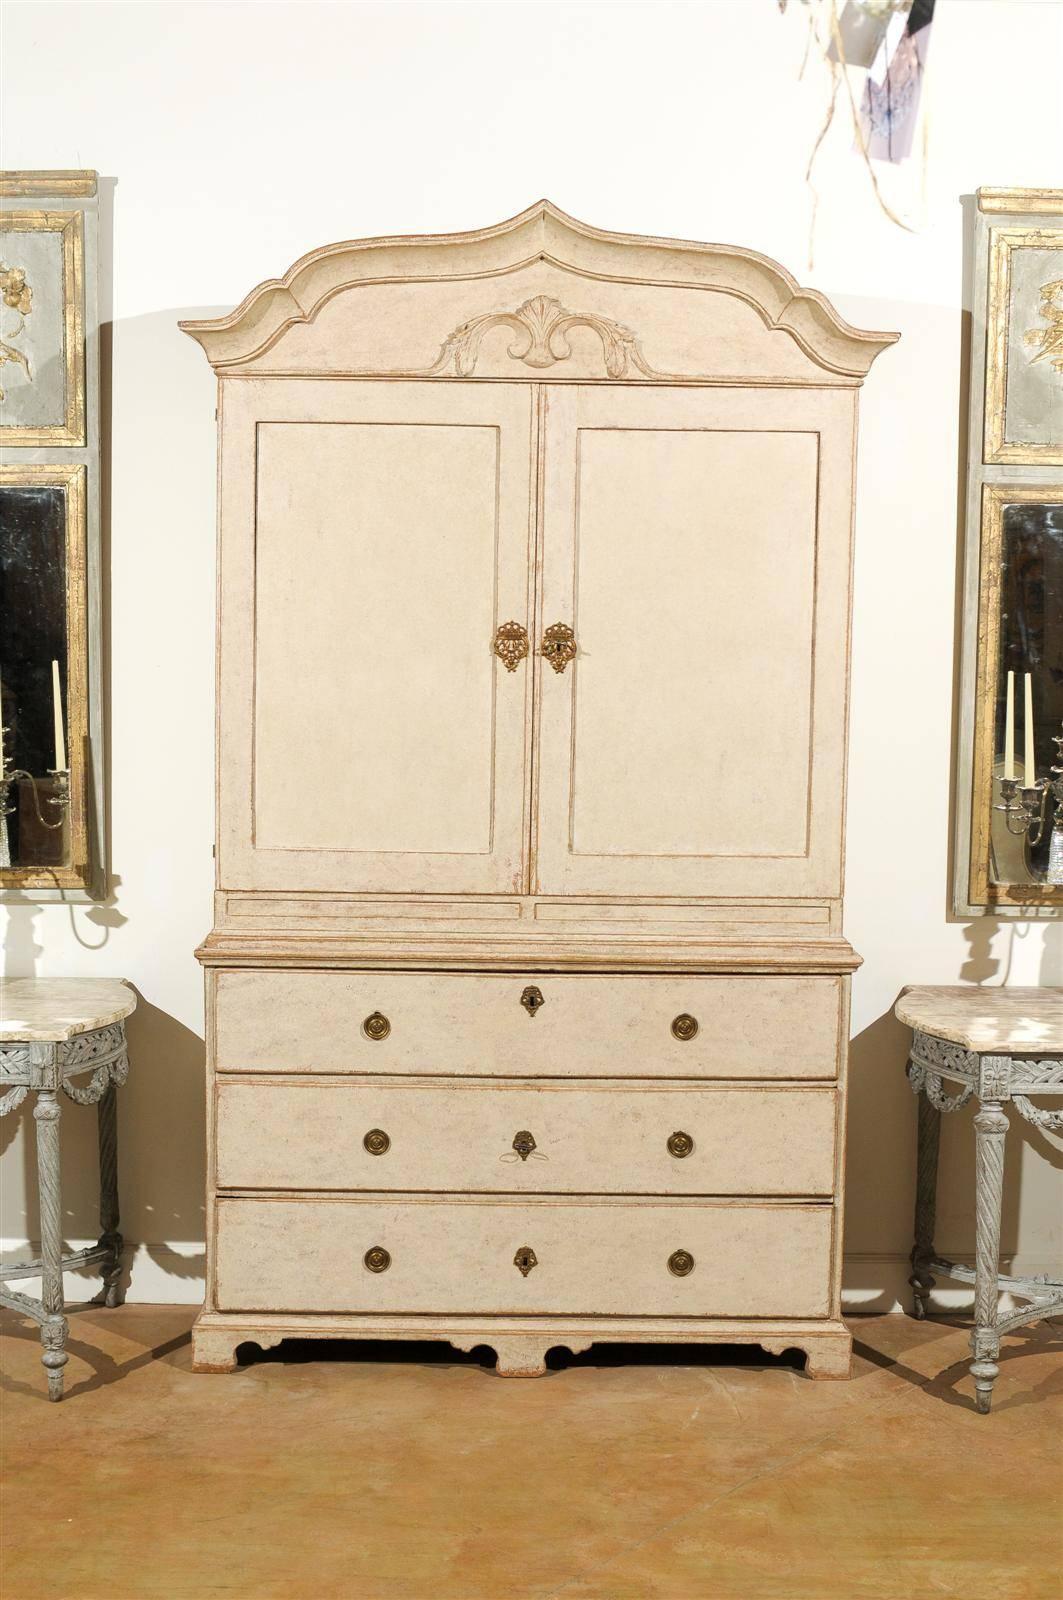 A Swedish Period Rococo painted wood cabinet with carved pediment, two doors over three drawers and original hardware from the mid 18th century. This exquisite Swedish linen press features a cross-bow shaped molded pediment, proudly sitting above an